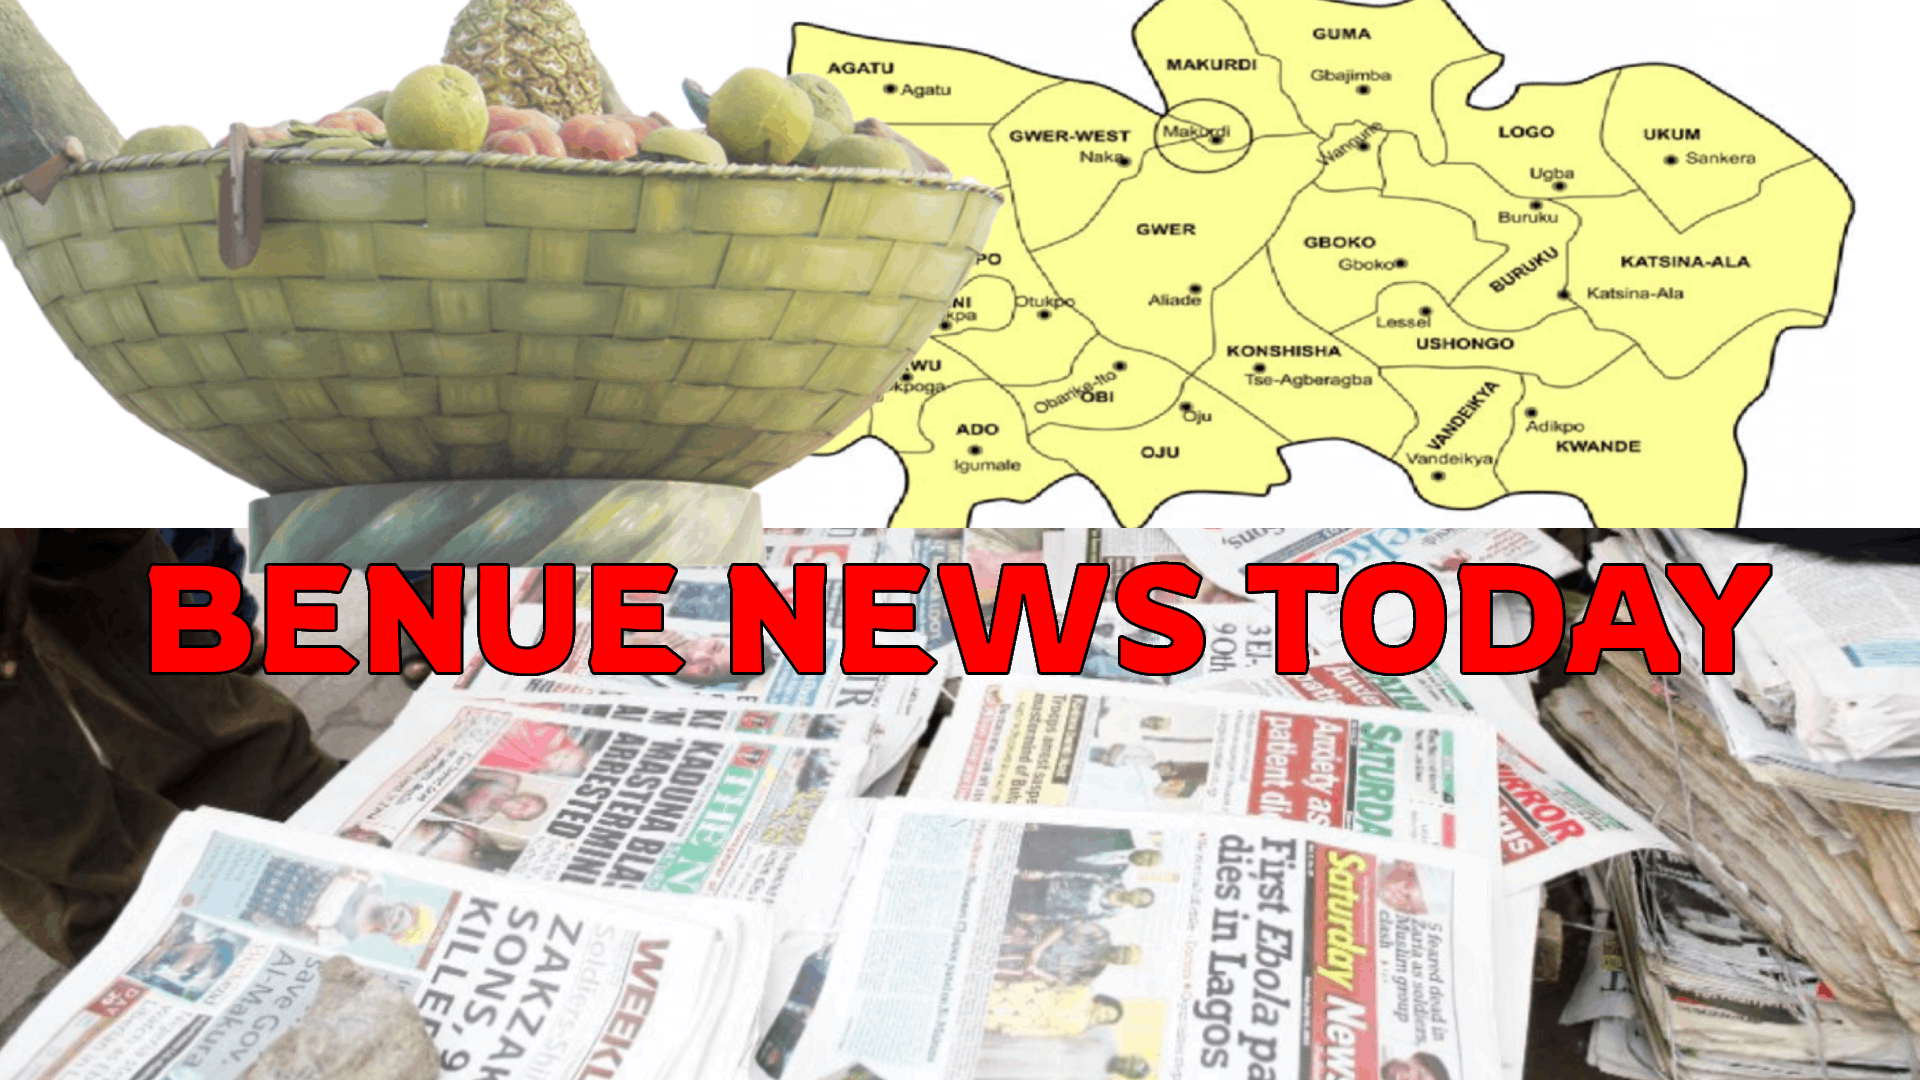 Latest Benue News today, Friday, July 29 2022